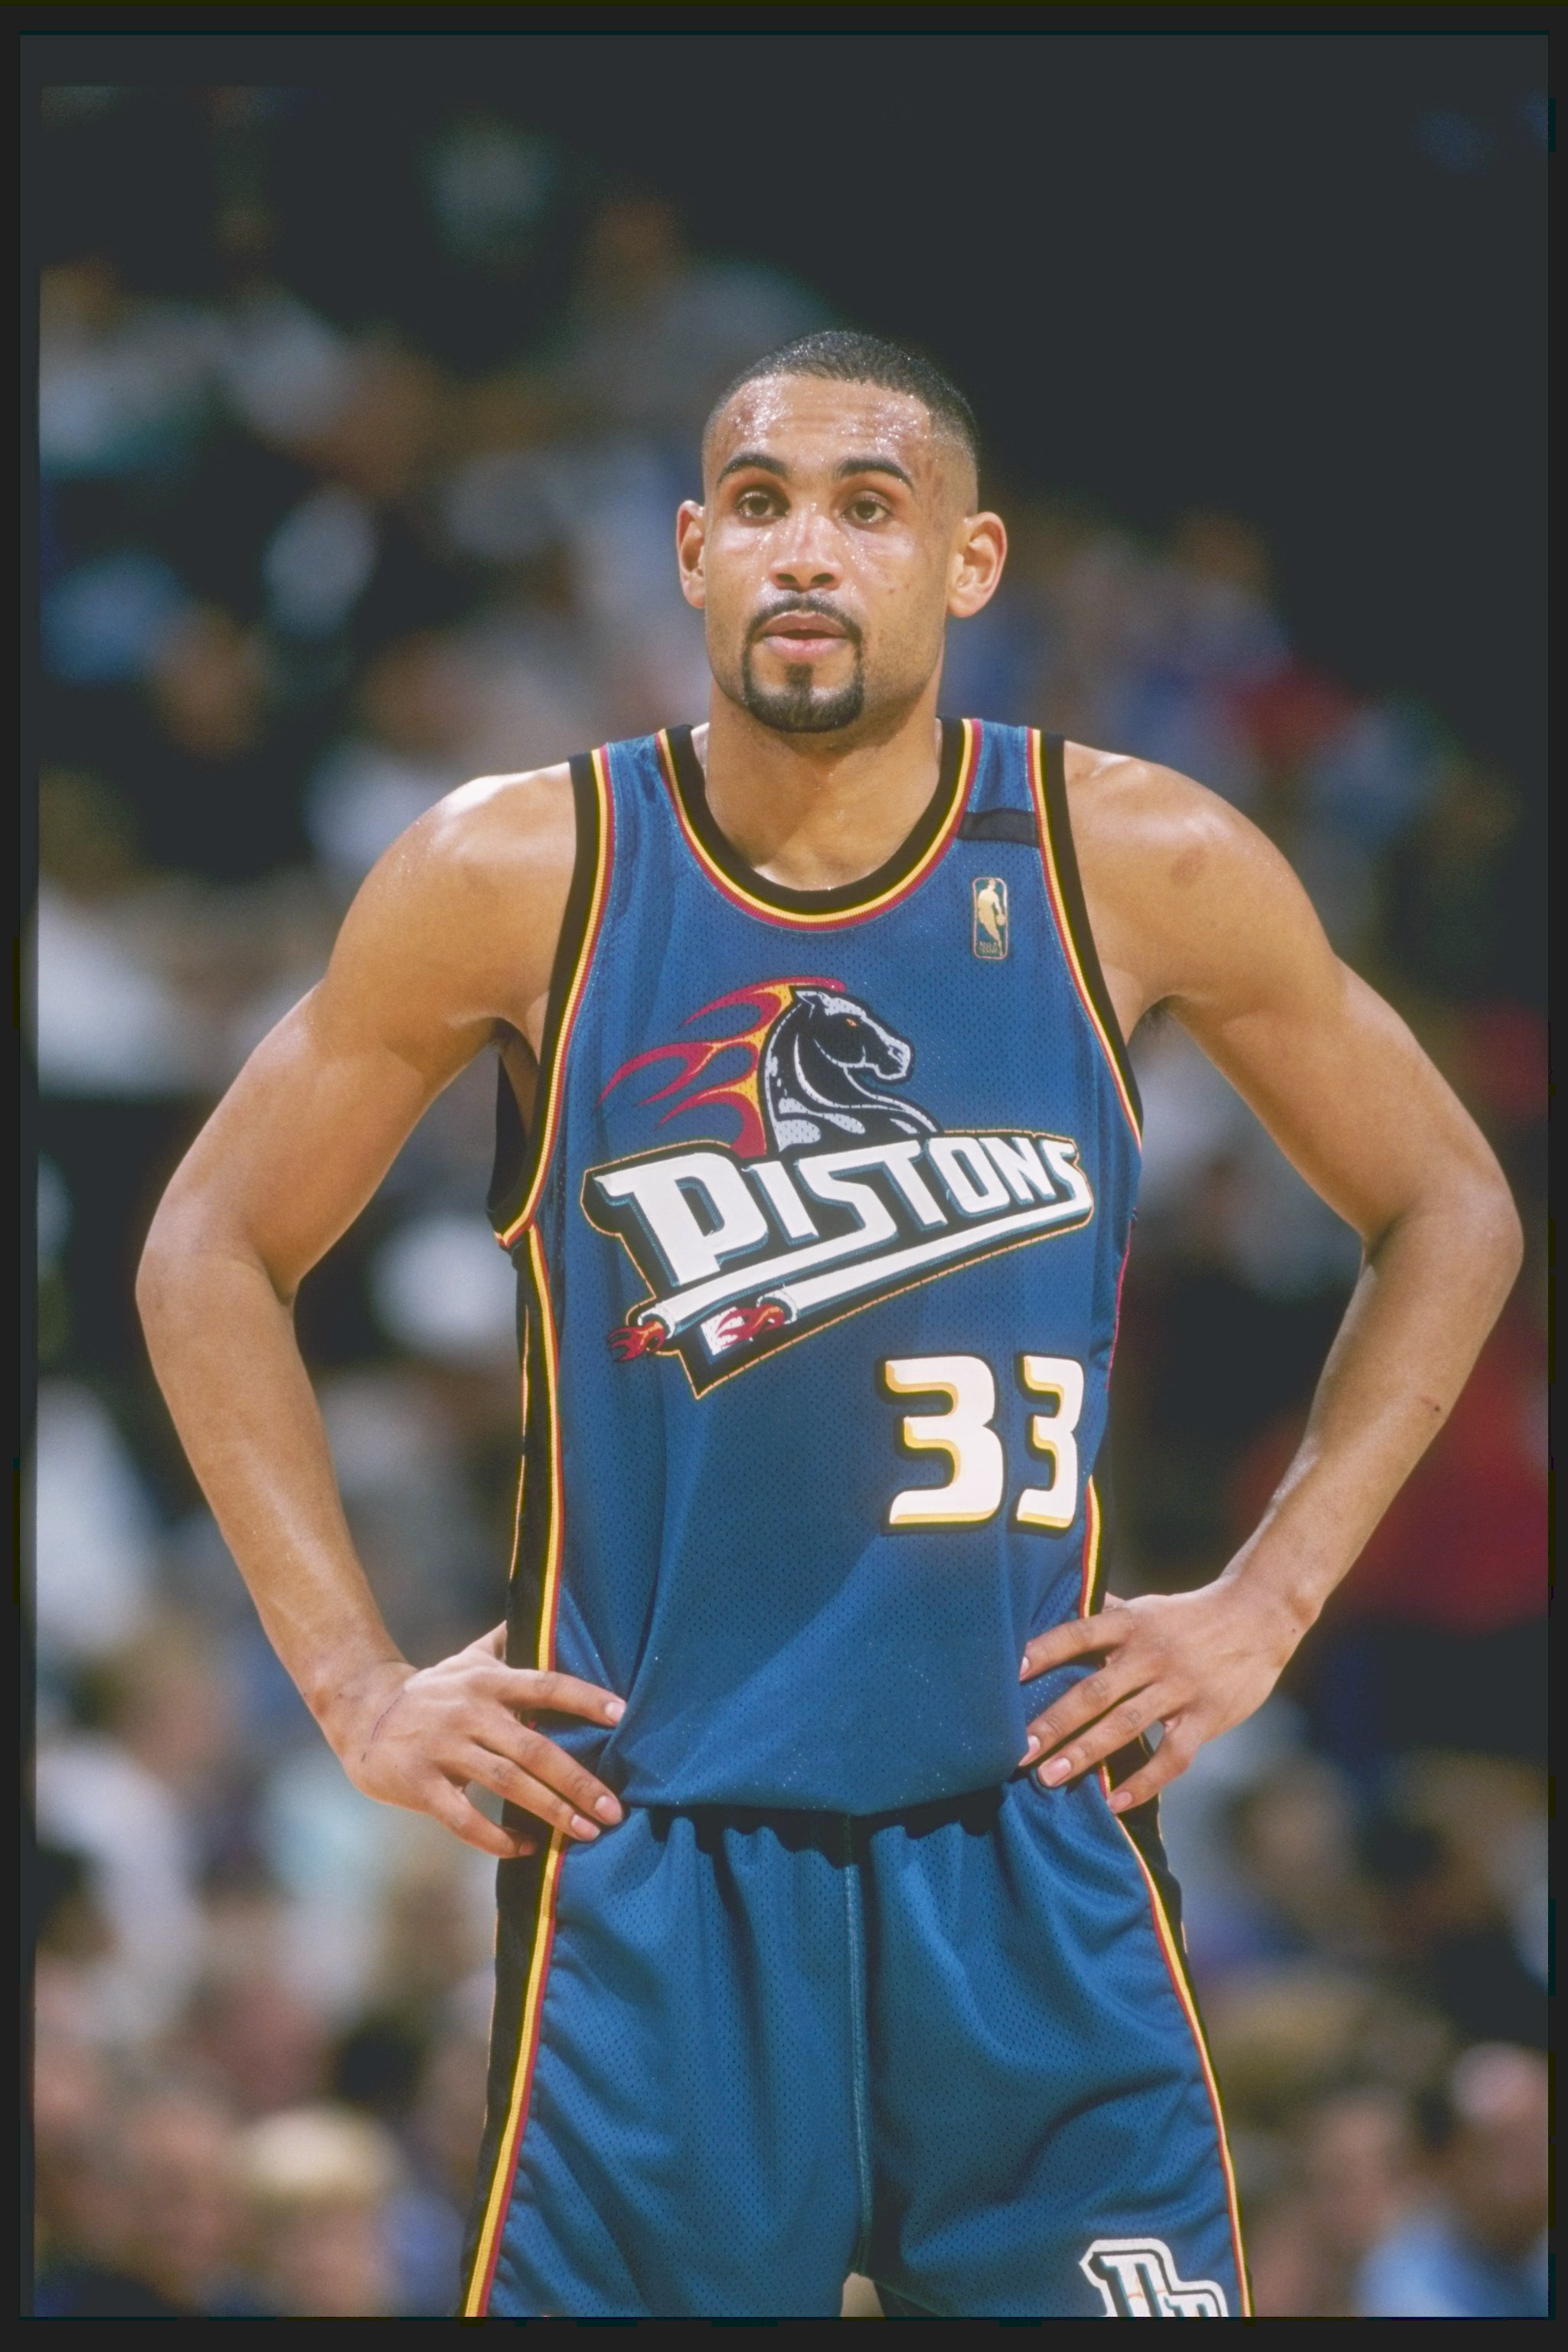 Forward Grant Hill of the Detroit Pistons stands on the court during a game against the Dallas Mavericks at Reunion Arena in Dallas, Texas. The Pistons won the game 100-82.